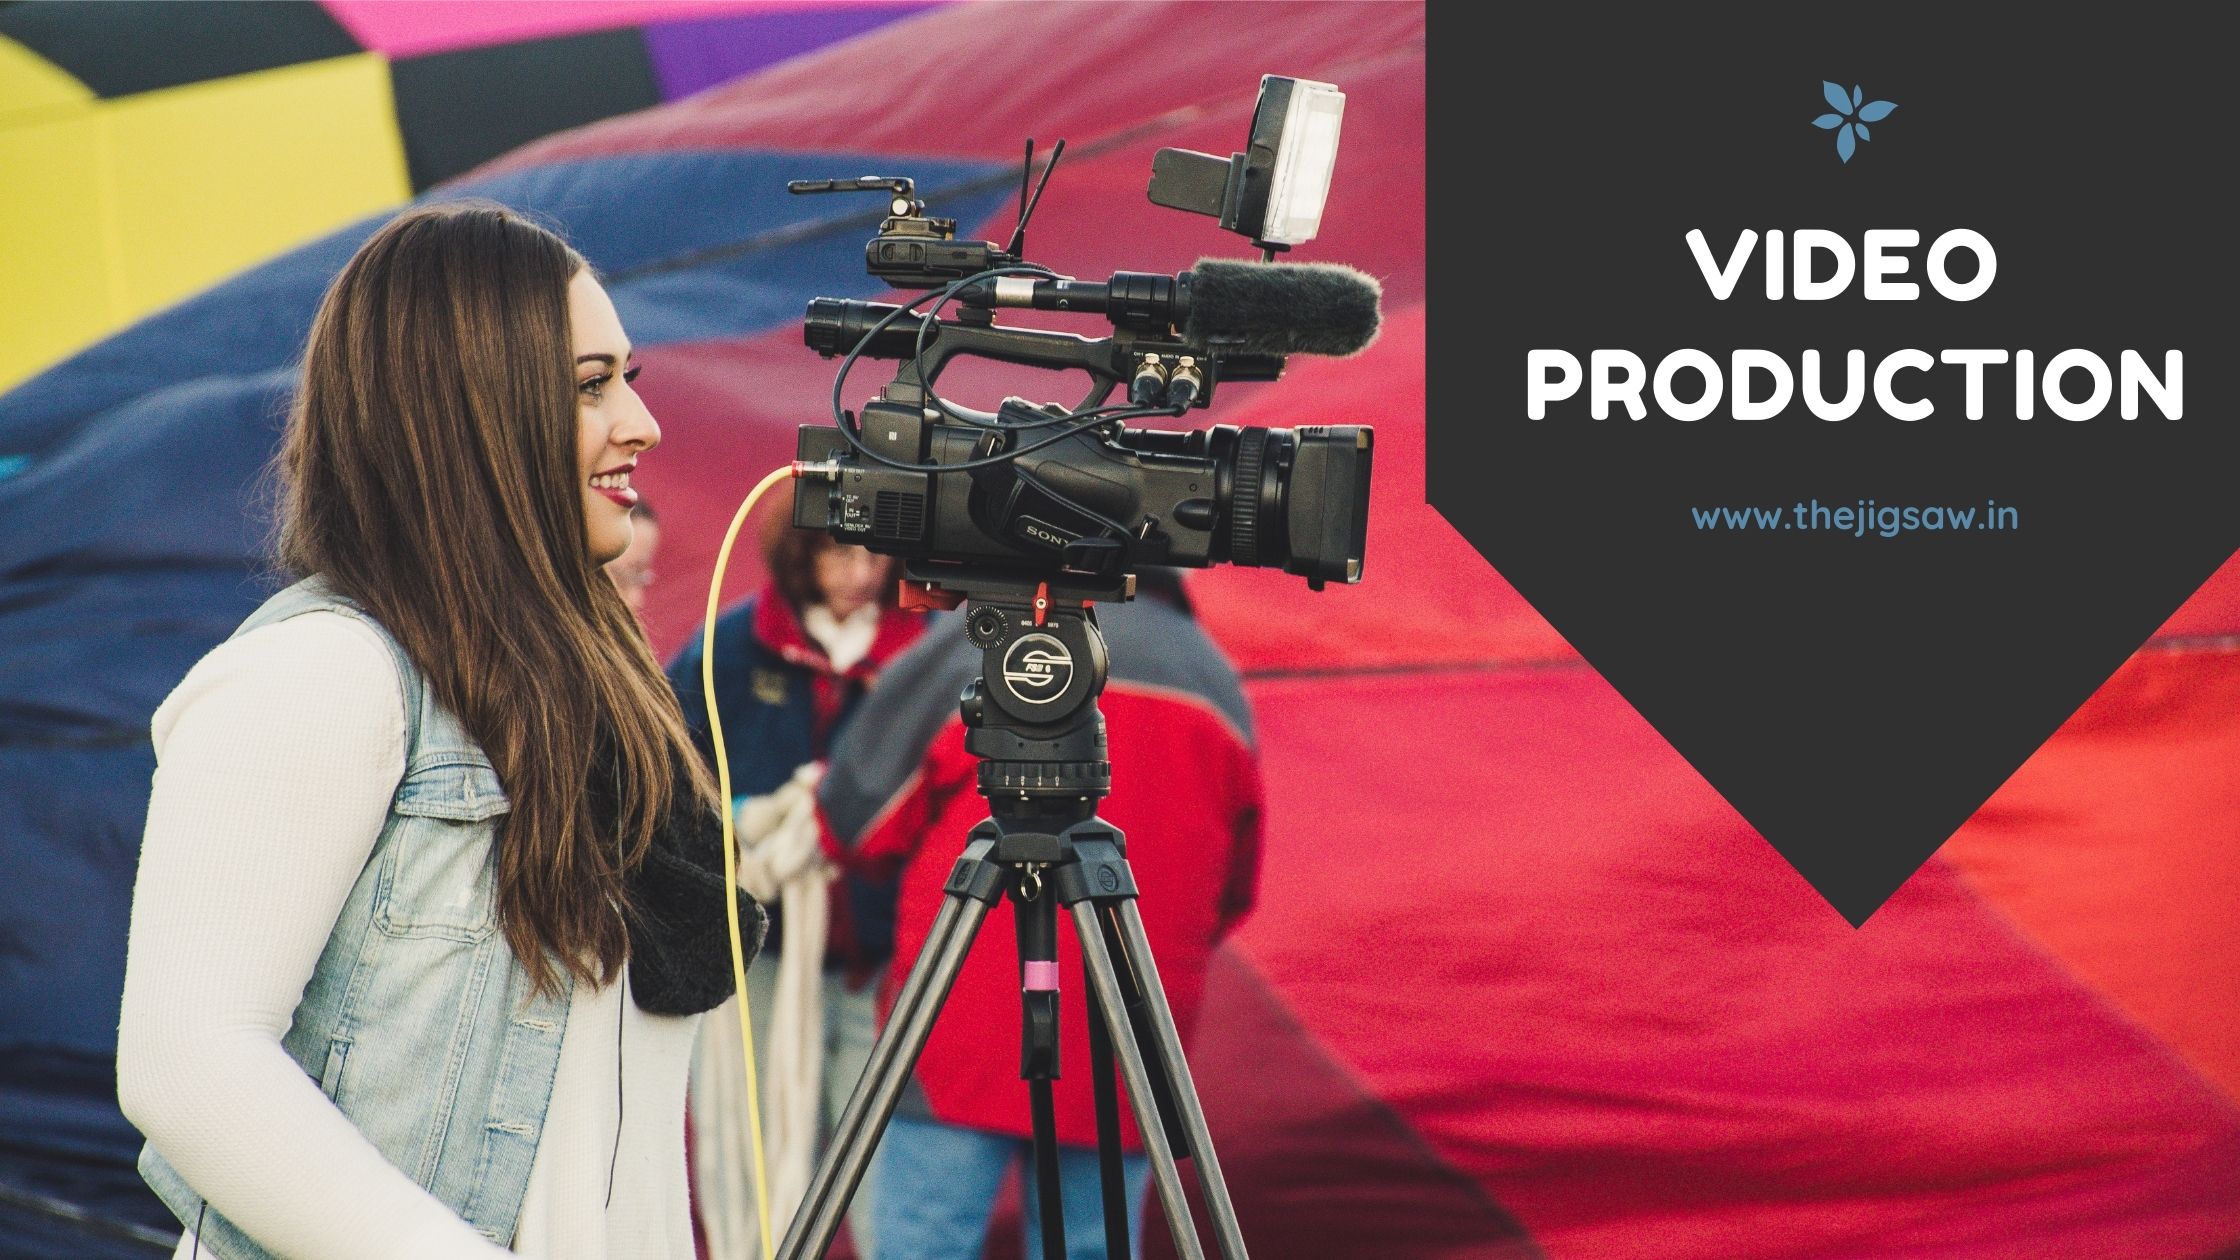 2021 Video Production Companies: Benefits And Requirements